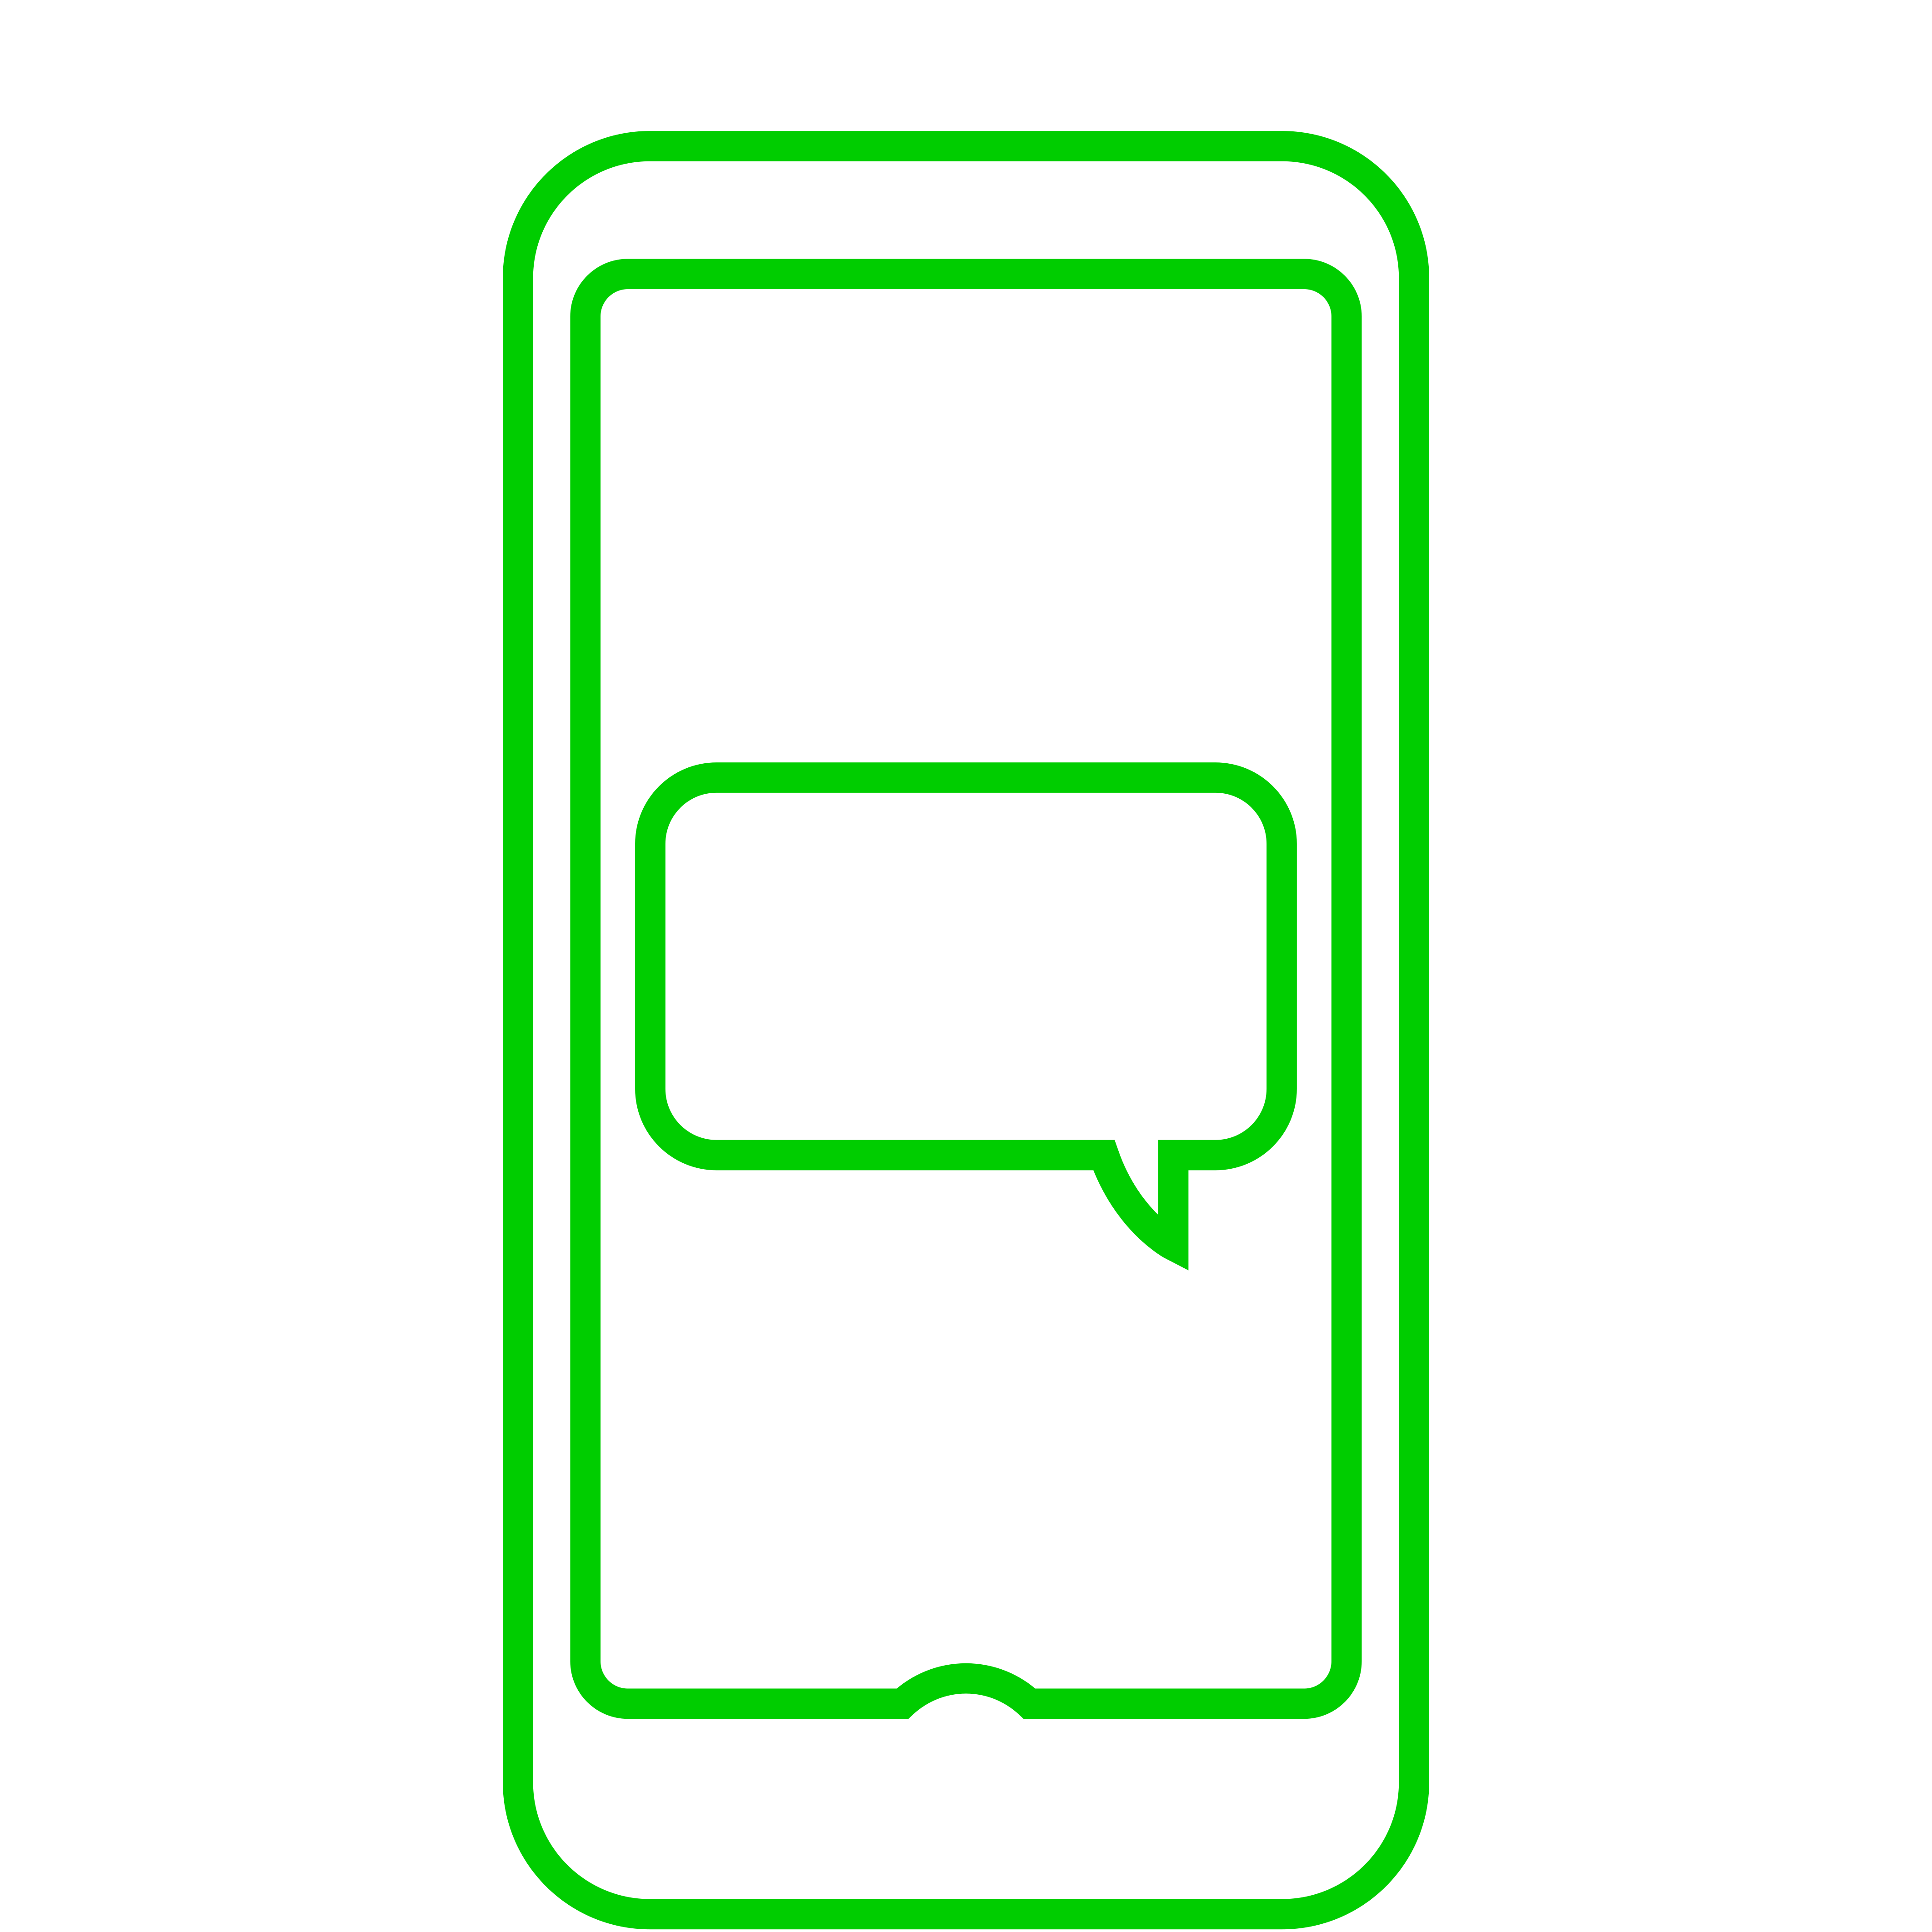 sms-confirmation-icon-green